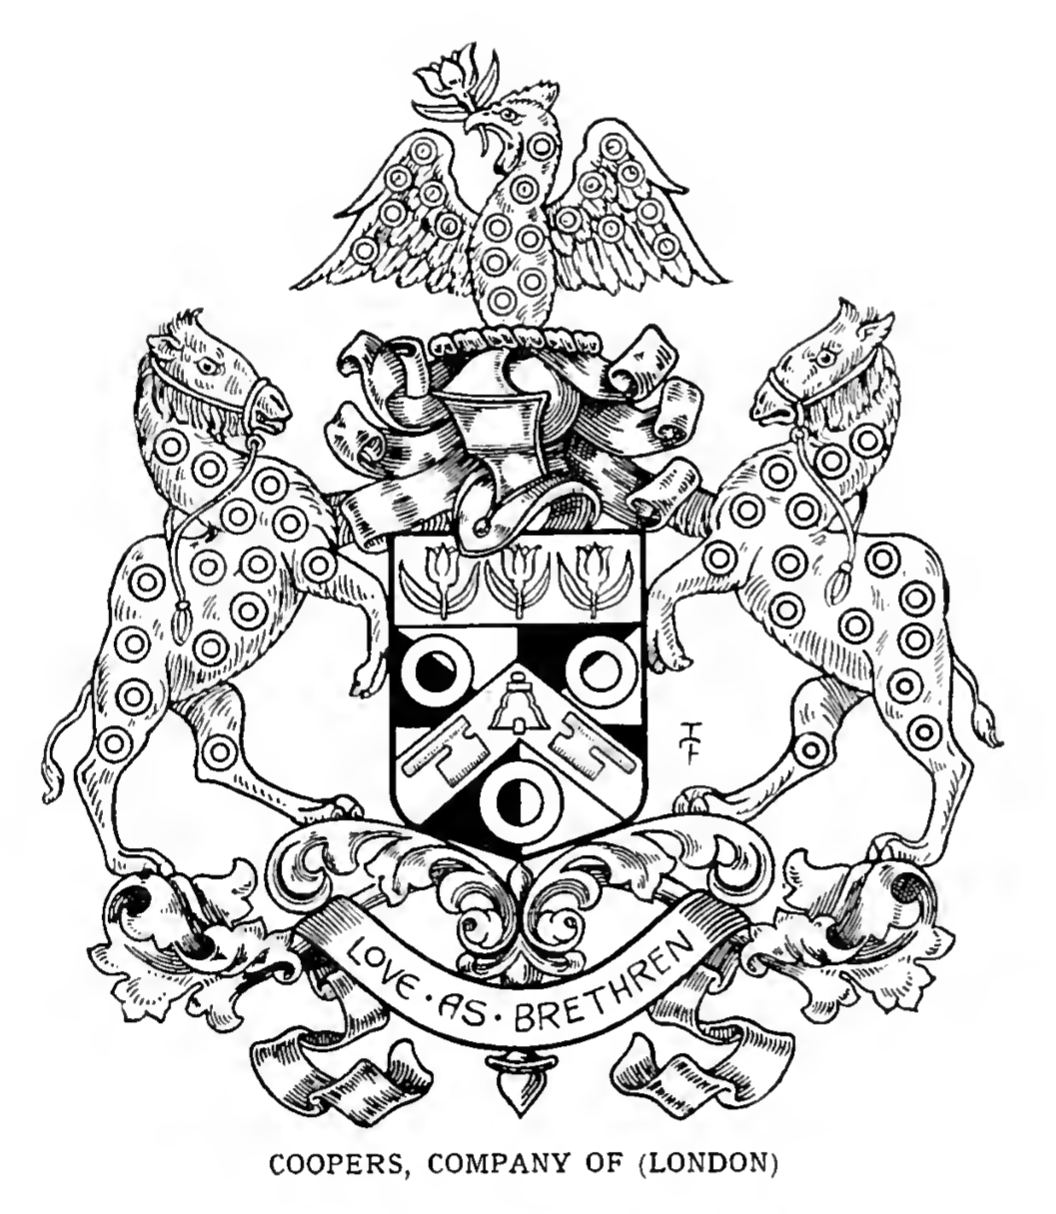 COOPERS, The Worshipful Company of (London).